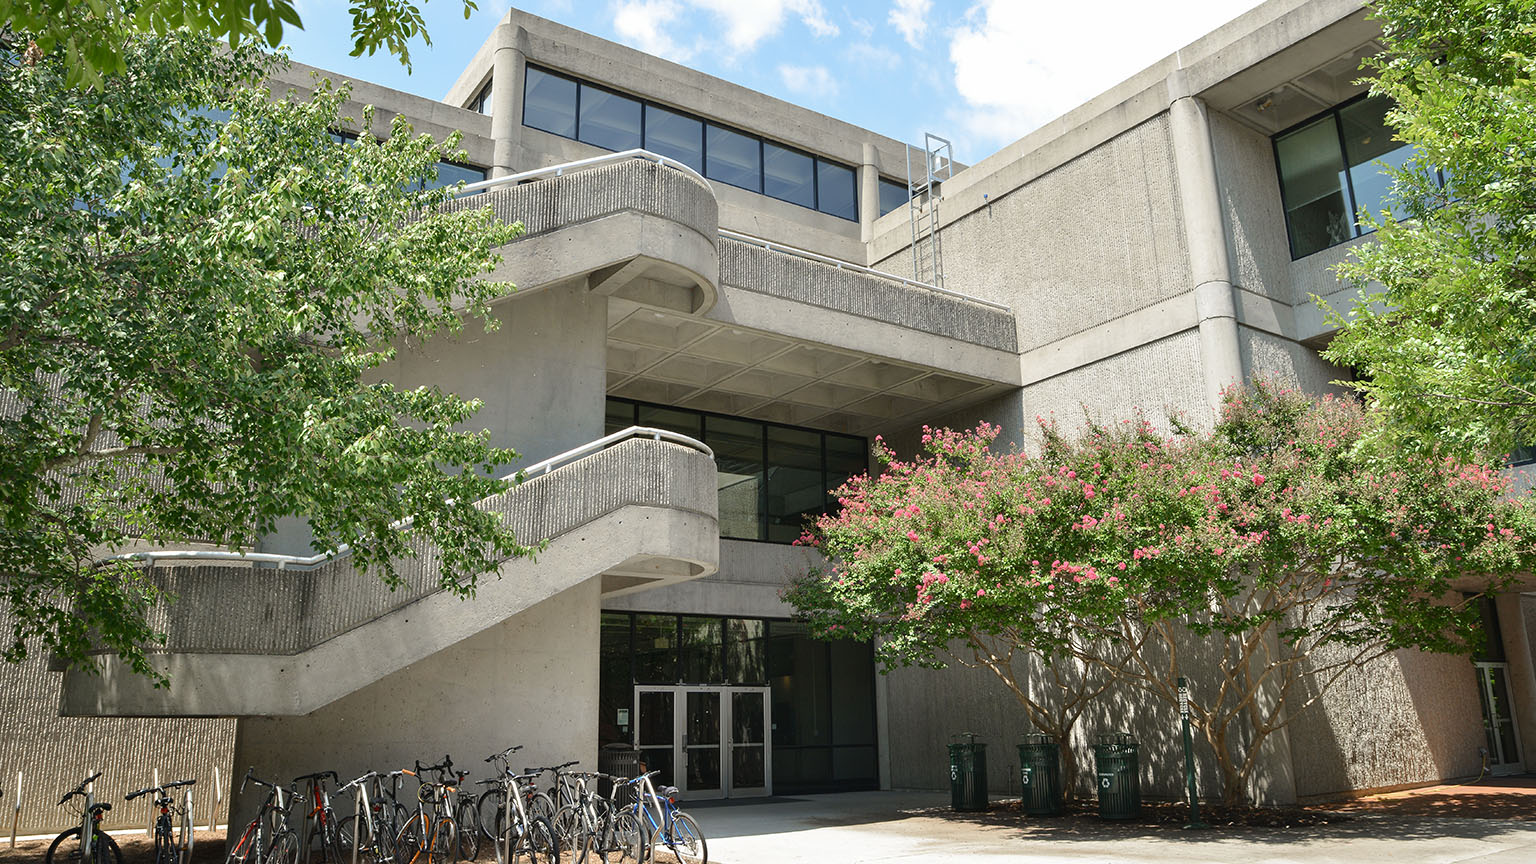 A photo of the West entrance of the West Architecture Building on Georgia Tech campus.